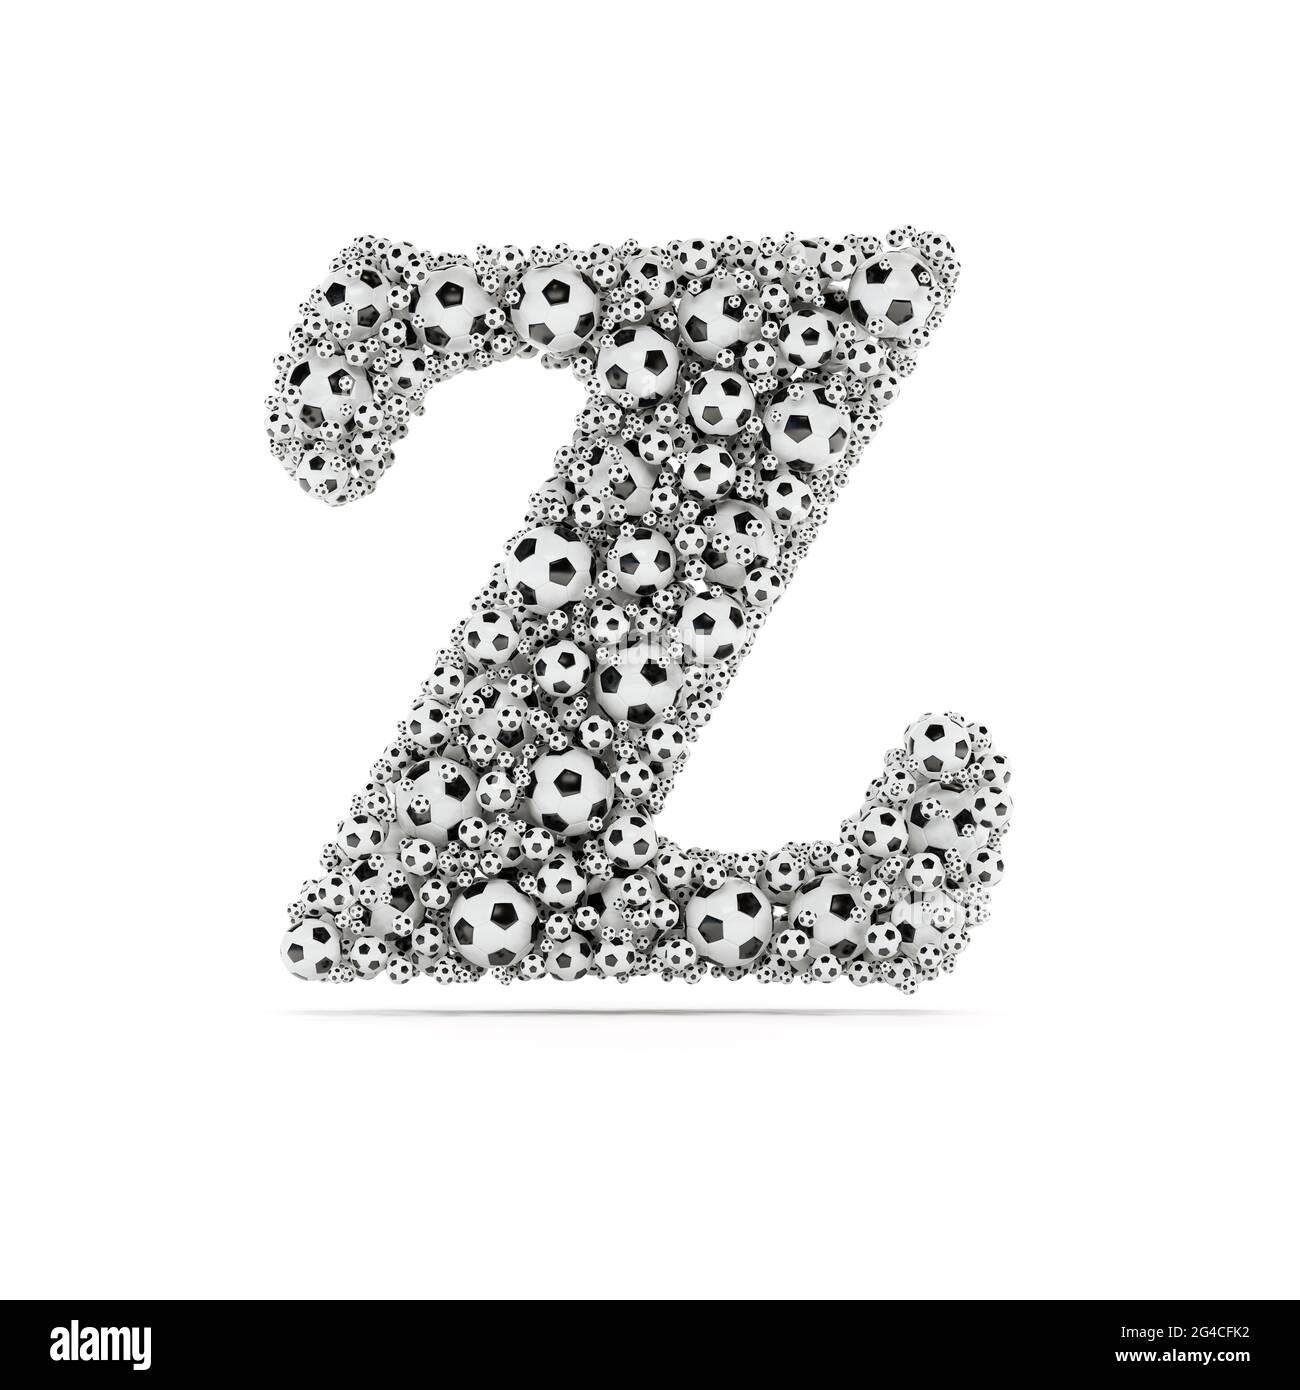 Z letter with soccer football balls. Realistic 3d rendering illustration. Isolated on white background with shadow cast Stock Photo